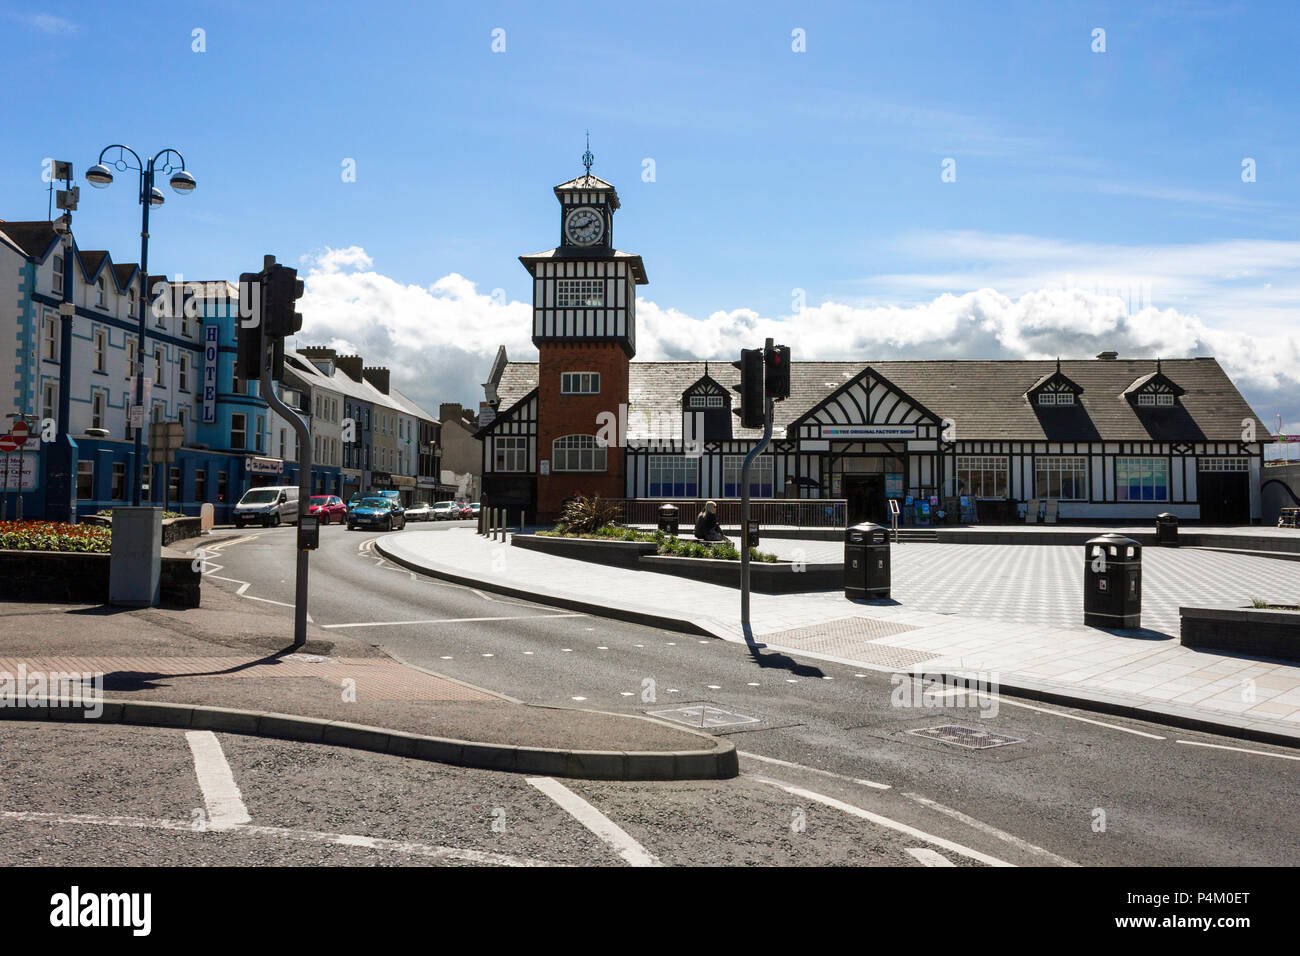 Portrush, Northern Ireland. Views of Kerr St and Portrush railway station, terminus of the Coleraine-Portrush railway line in the seaside town of Port Stock Photo